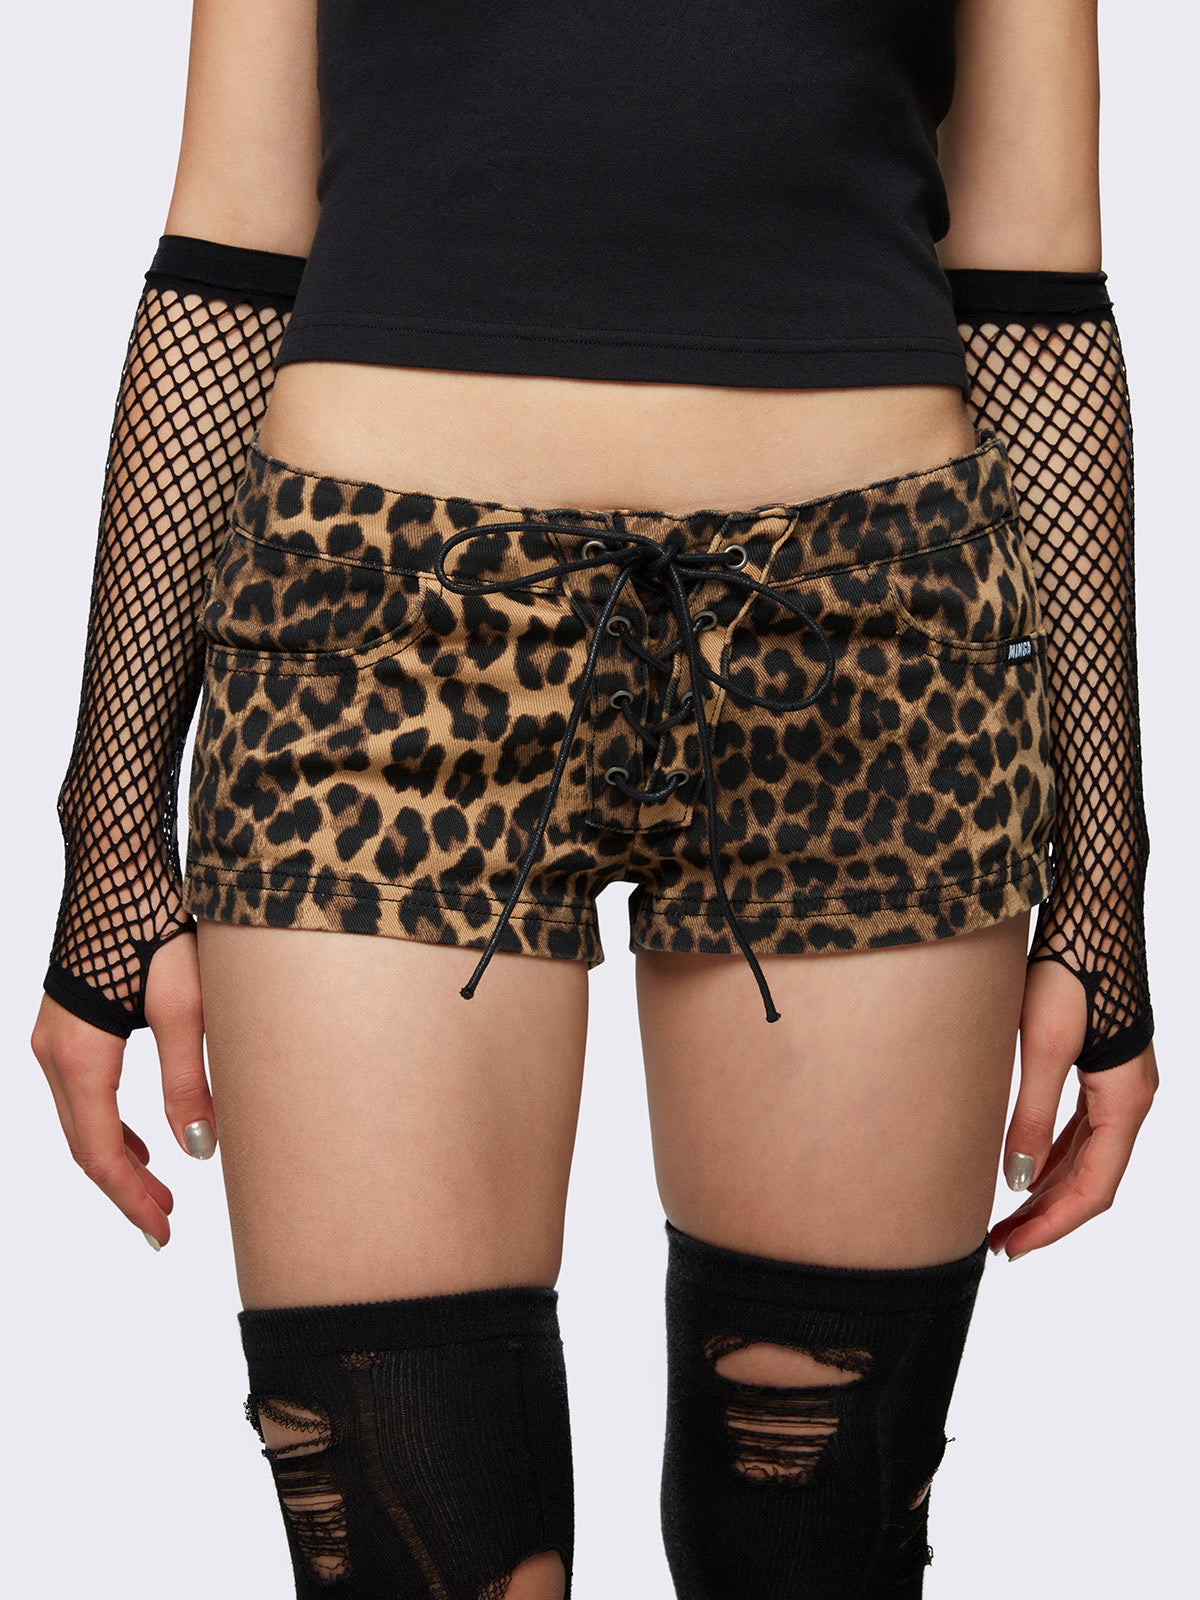 Mini shorts in leopard print with lace up